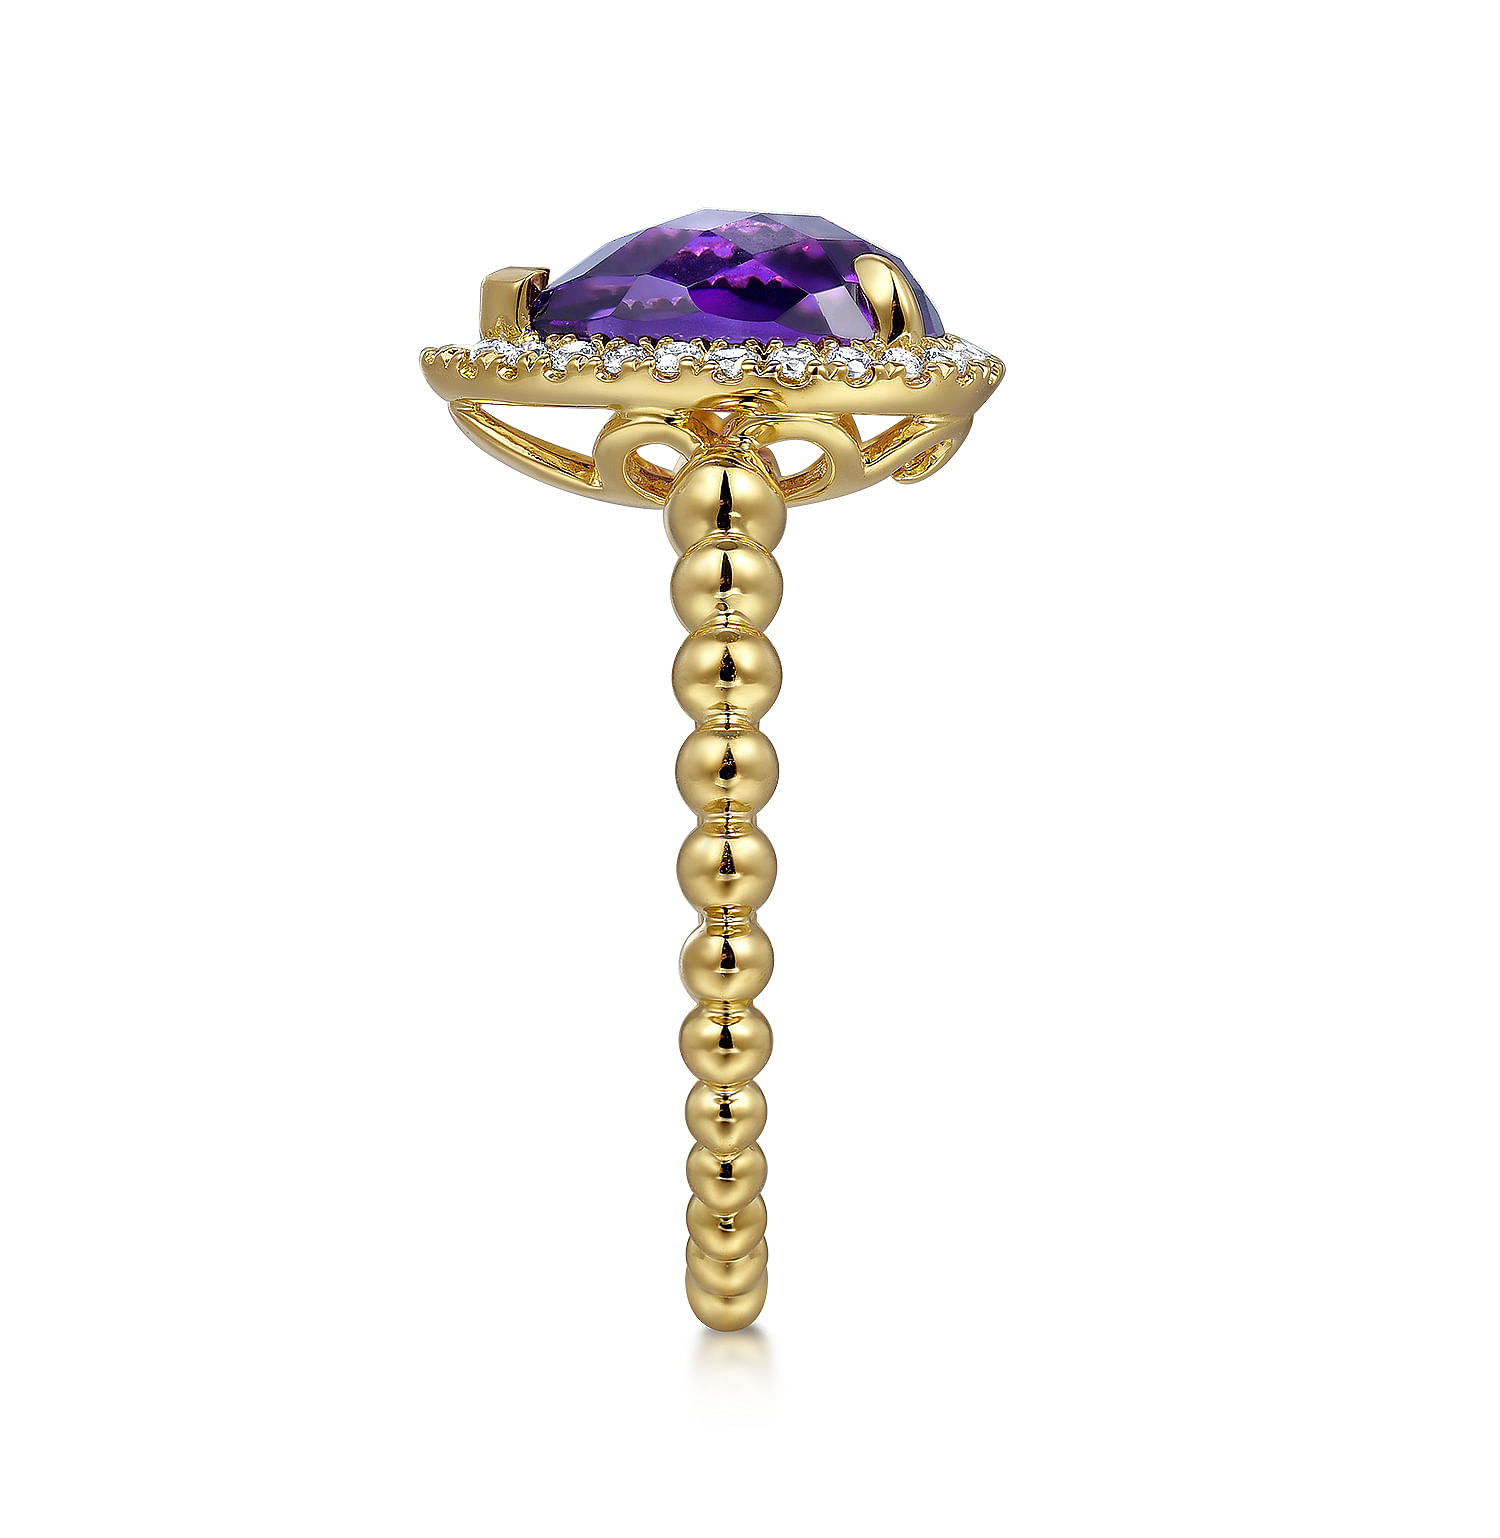 14K Yellow Gold Pear Shape Amethyst with Diamond Halo Ring